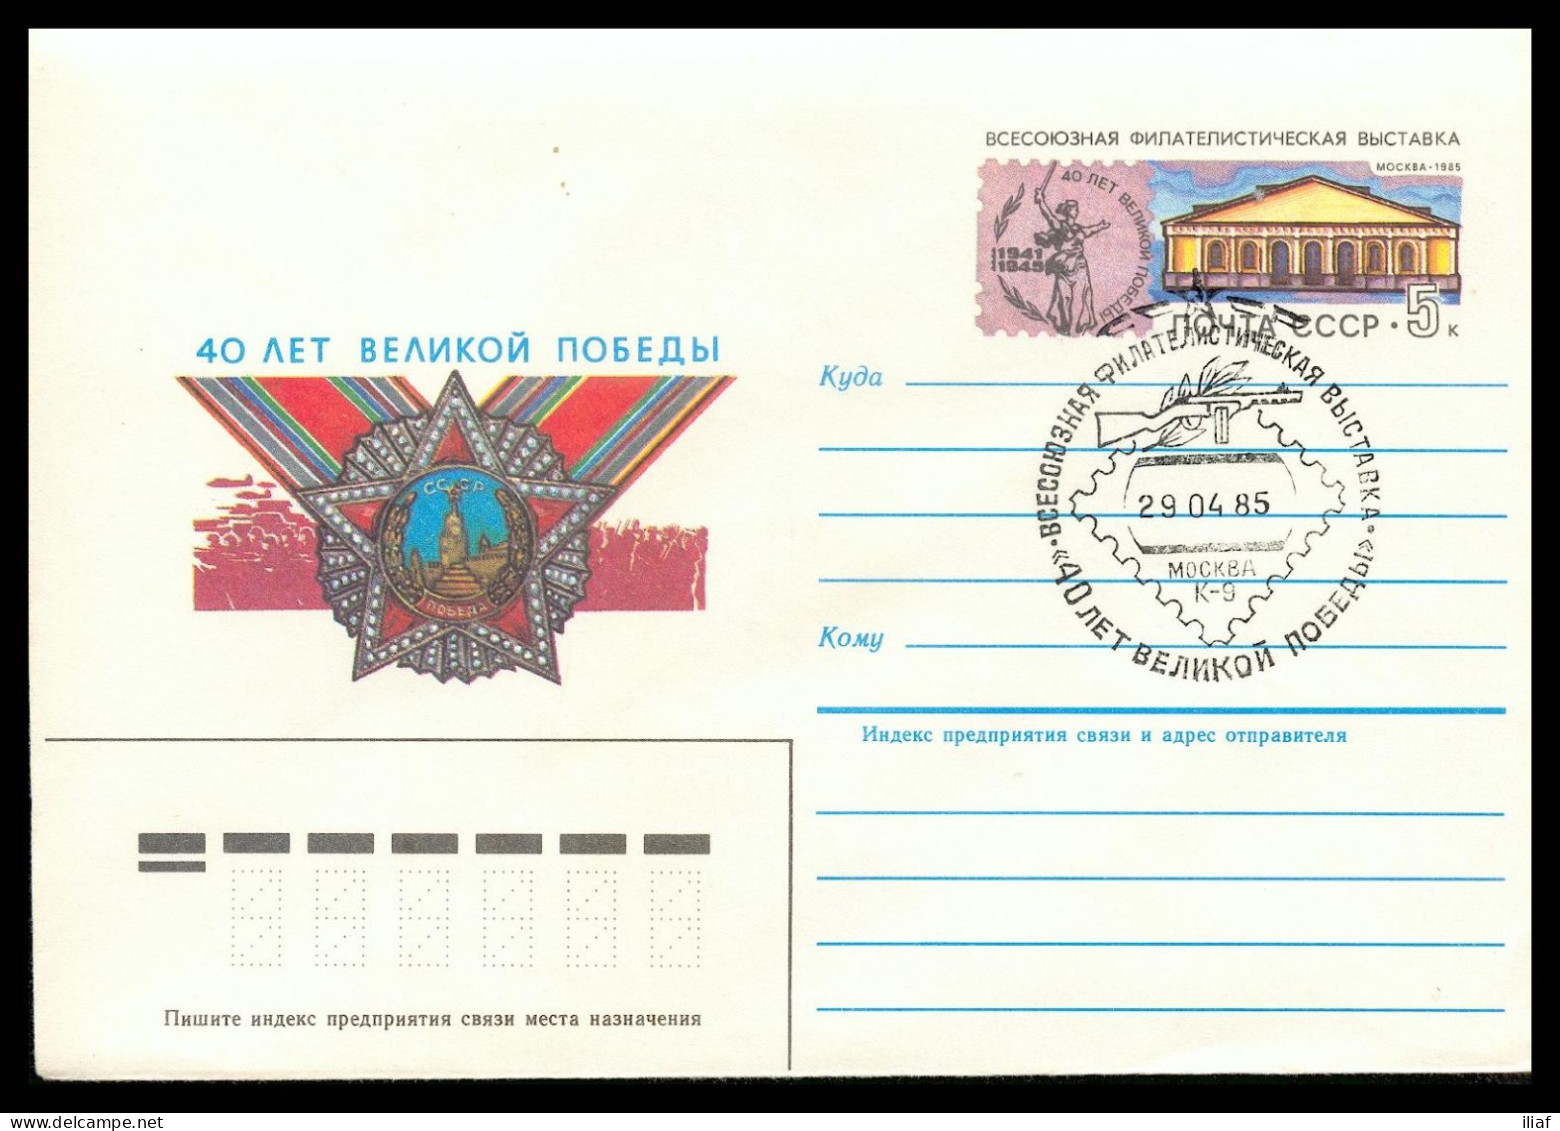 RUSSIA & USSR All Union Philatelic Exhibition 40 Years Victory In II WW   Illustrated Envelope With Special Cancellation - Philatelic Exhibitions